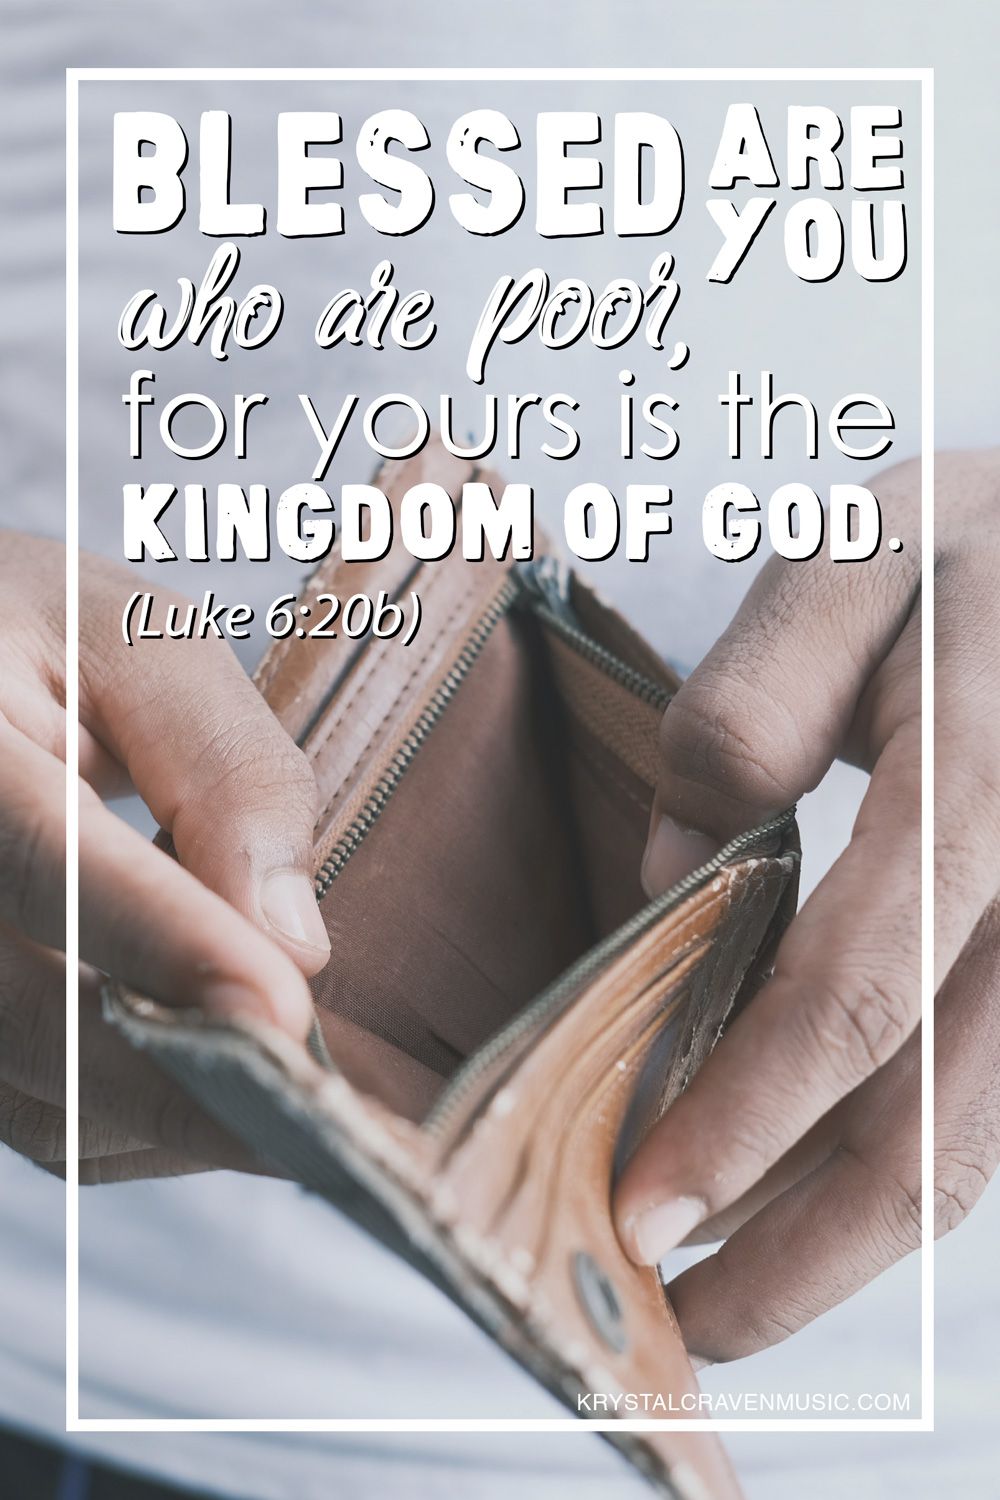 The devotional title text "Blessed are the Poor" overlaying the image of a person's hands holding open an empty wallet.